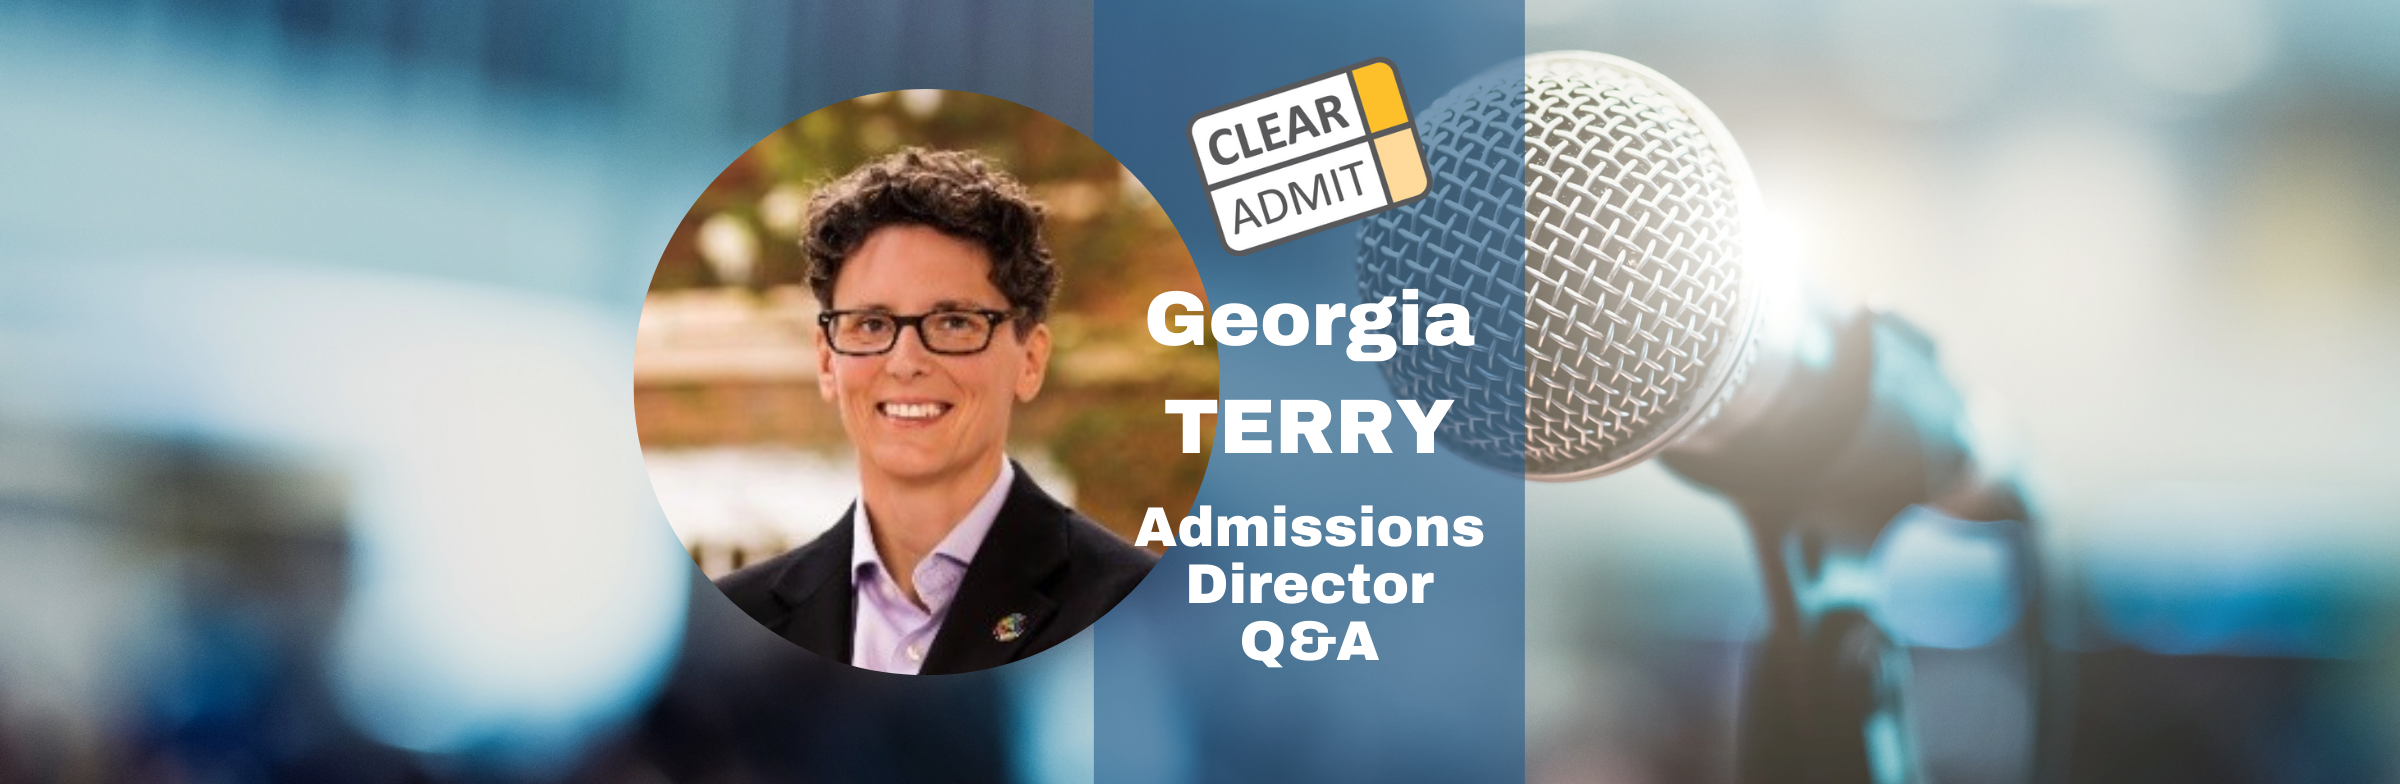 Image for Admissions Director Q&A: Deirdre M Kane of The University of Georgia’s Terry College of Business